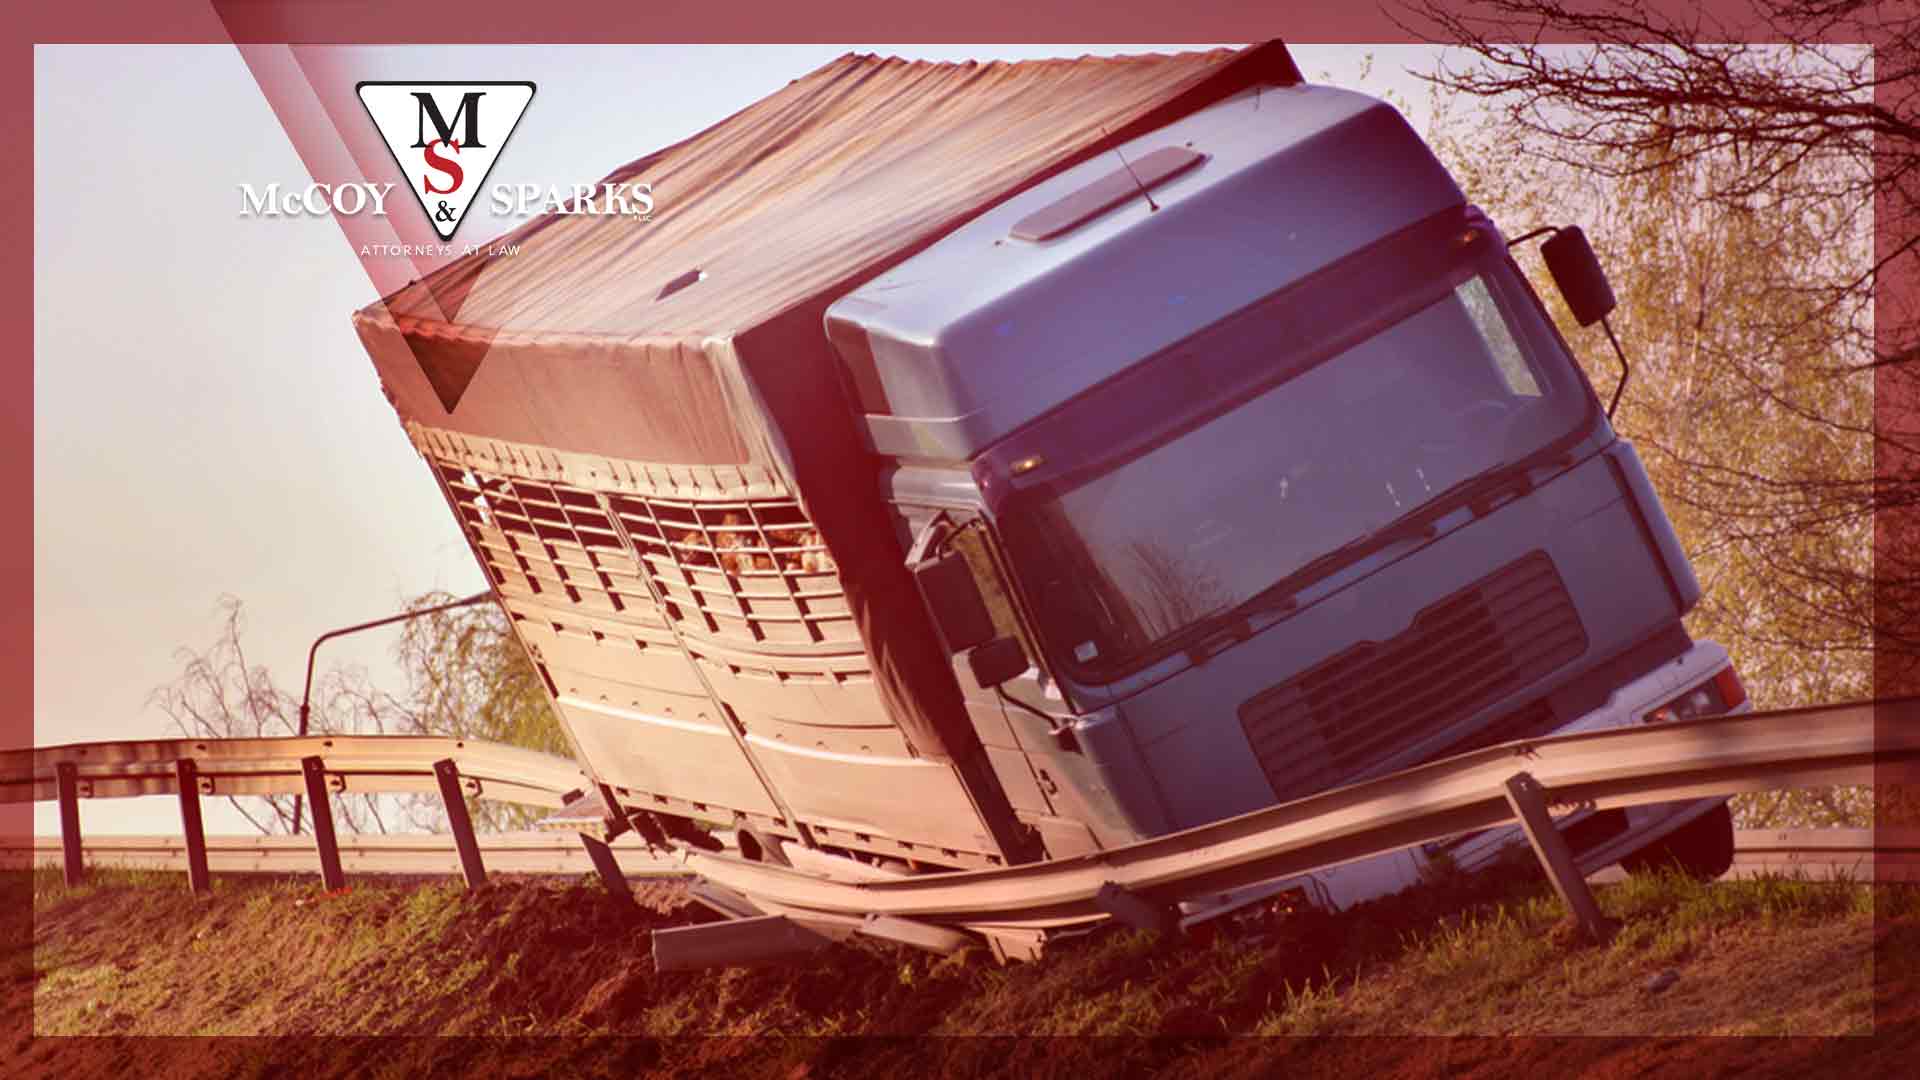 Truck Accident Liability: Who’s at Fault?